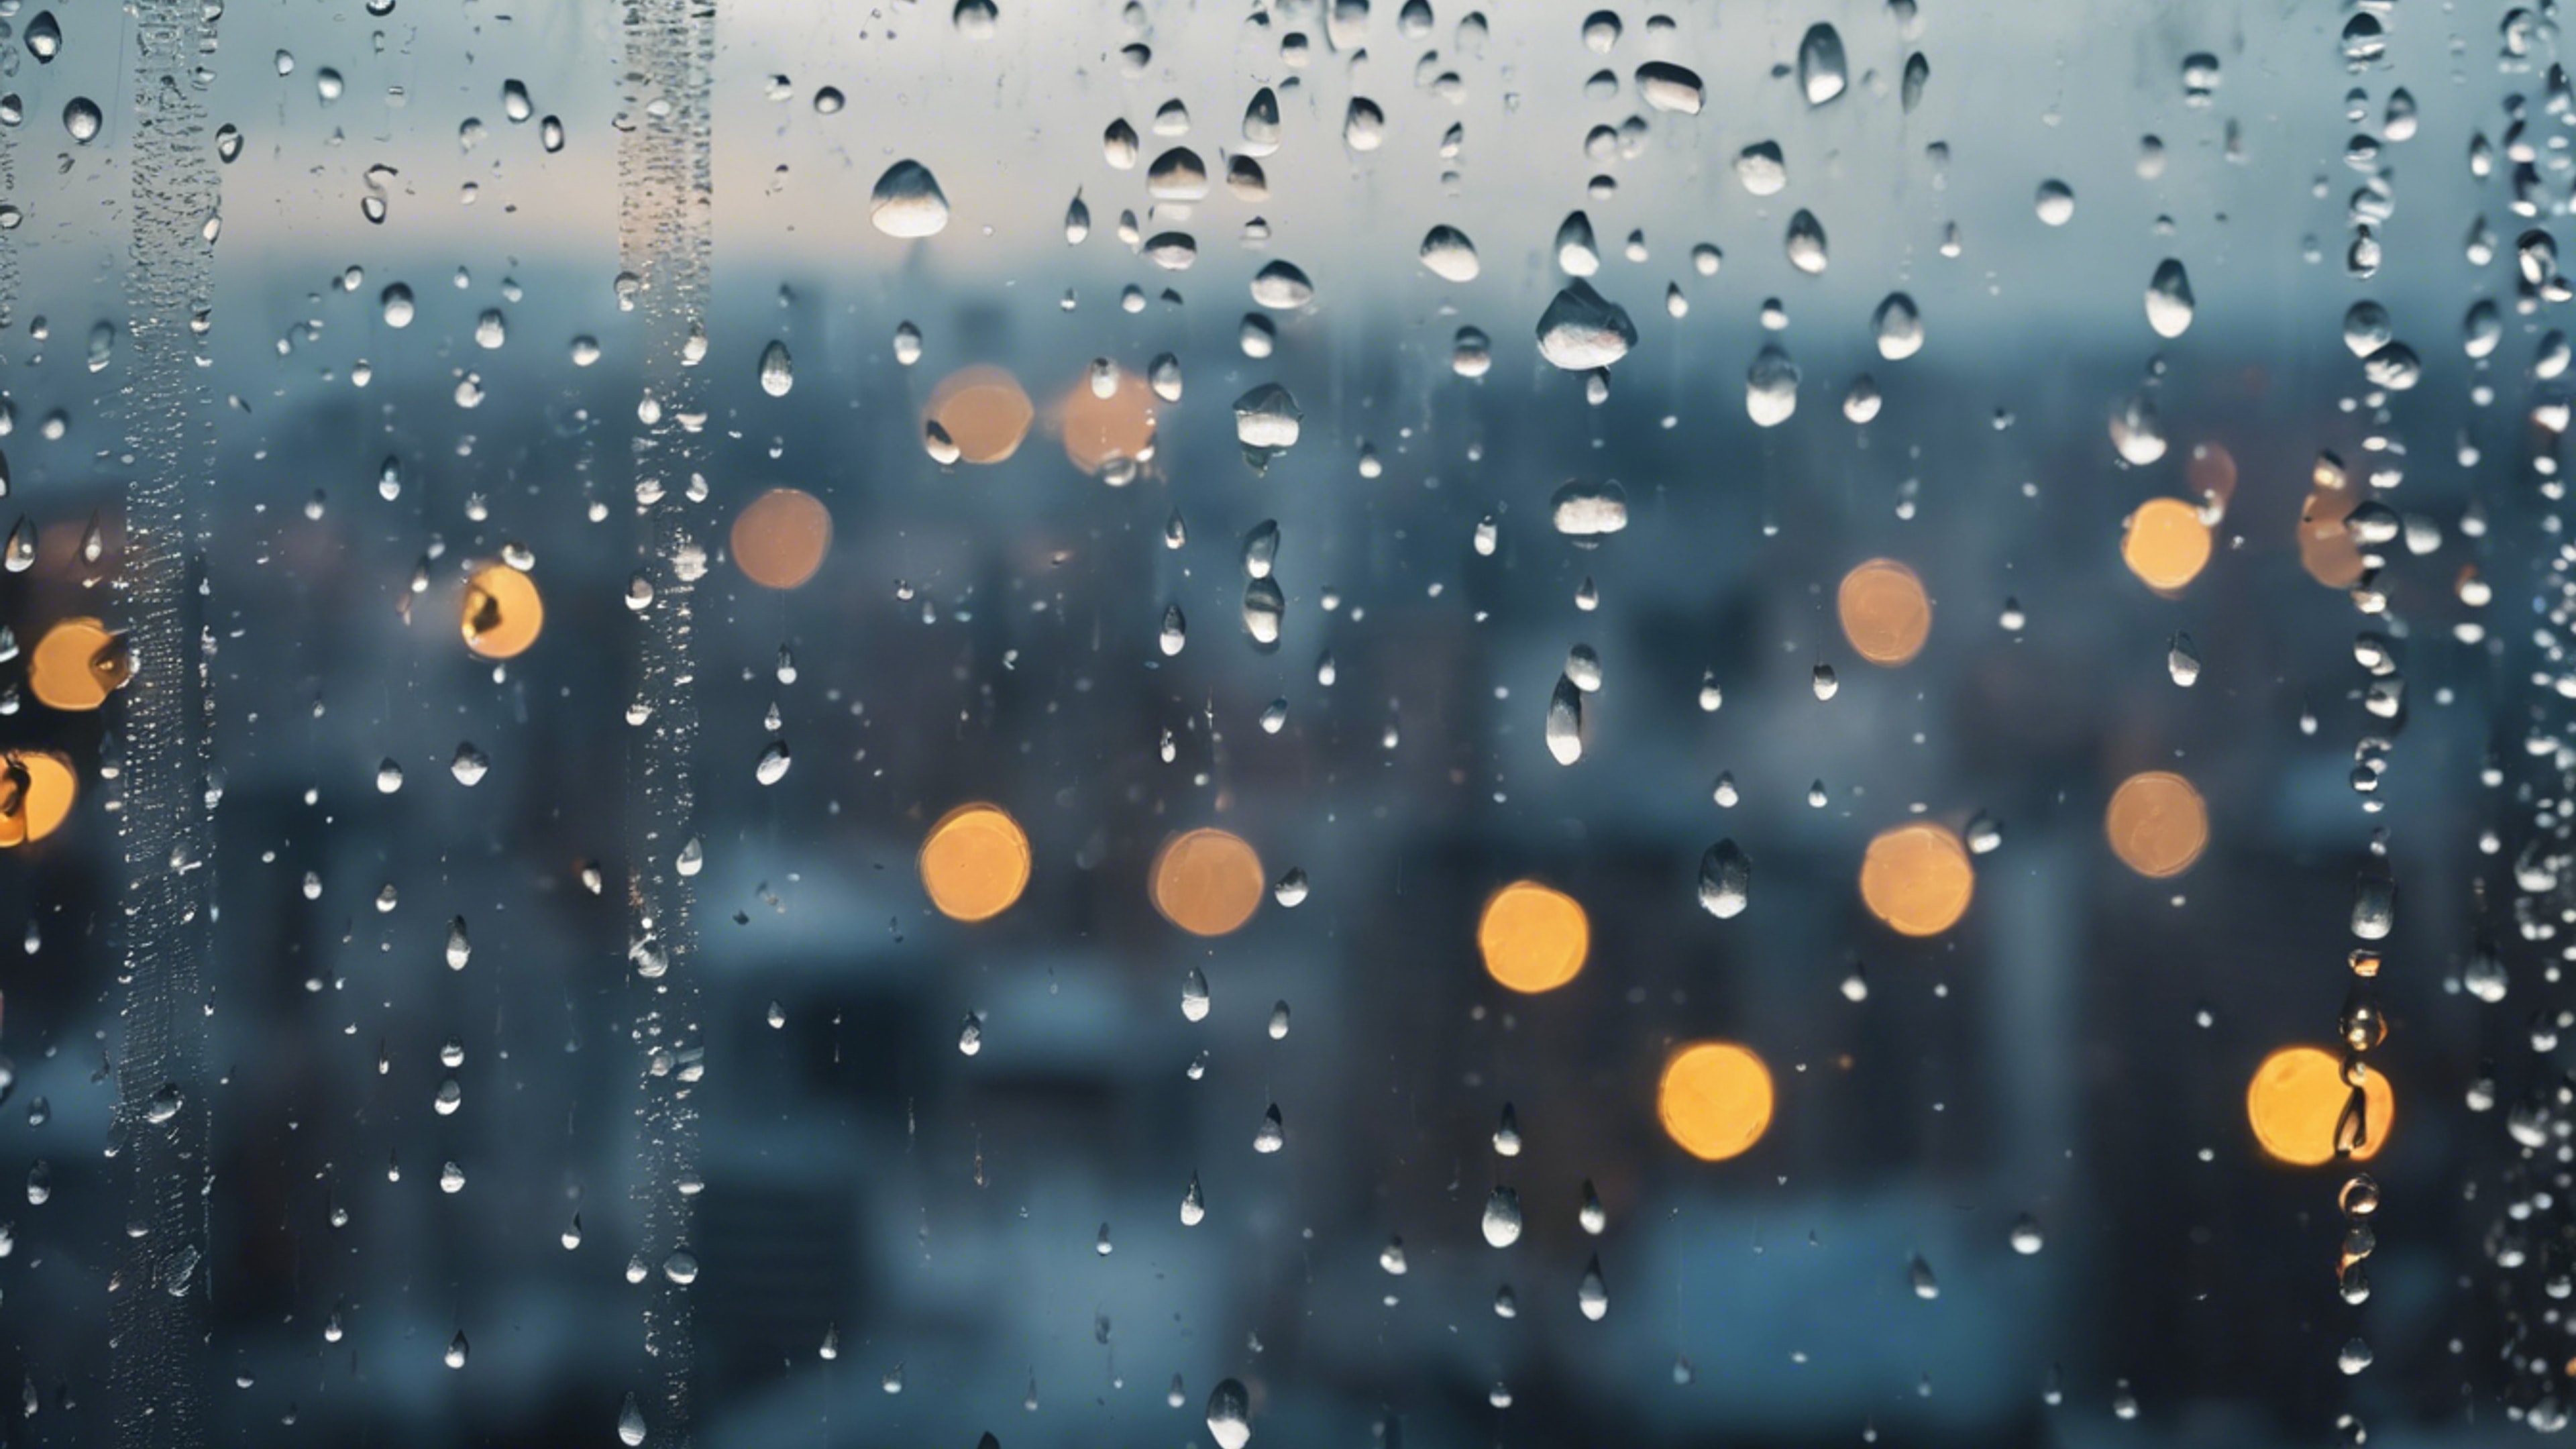 Close-up of raindrops streaming down a window pane, with a blurry cityscape in the background. Kertas dinding[d0f87e7319714e23a96f]